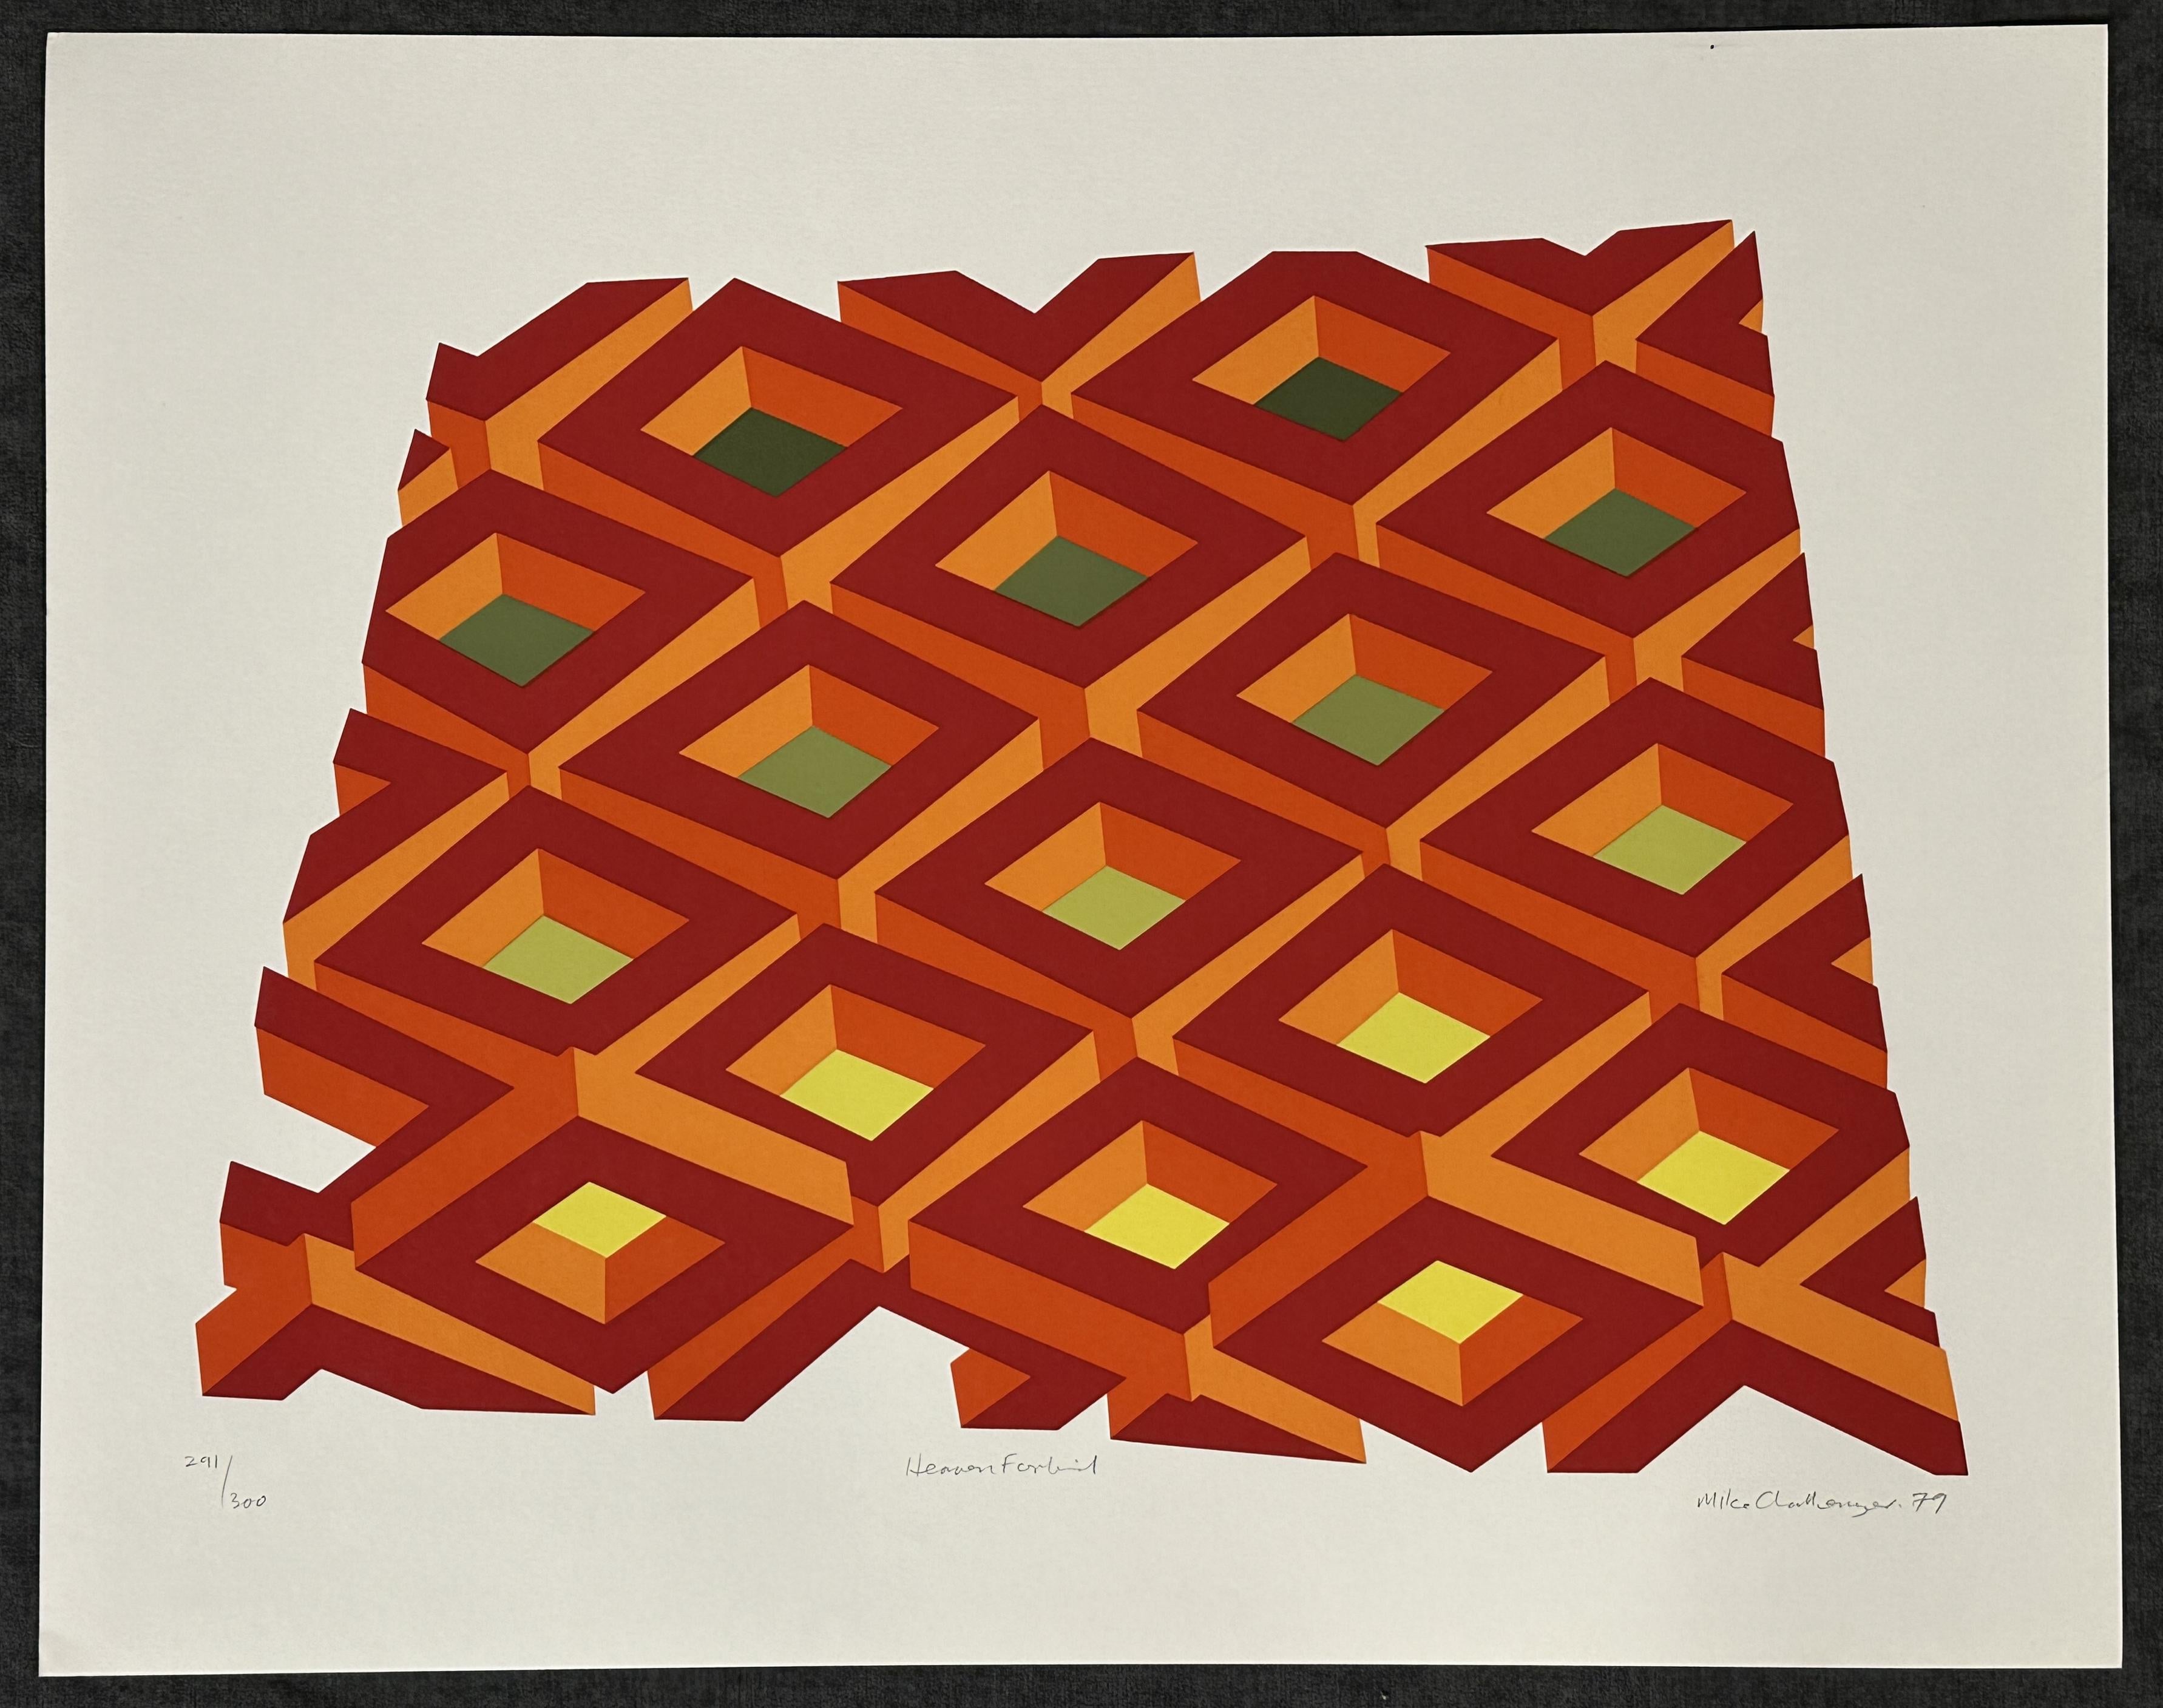 Michael Challenger
Heaven Forbid - 1979
Print - Silkscreen 17.5'' x 25''
Edition: Signed in pencil, titled, dated and marked 291/300

Challenger's work is a powerful interplay of op-art and constructivism. His graphic work evokes the counter- play